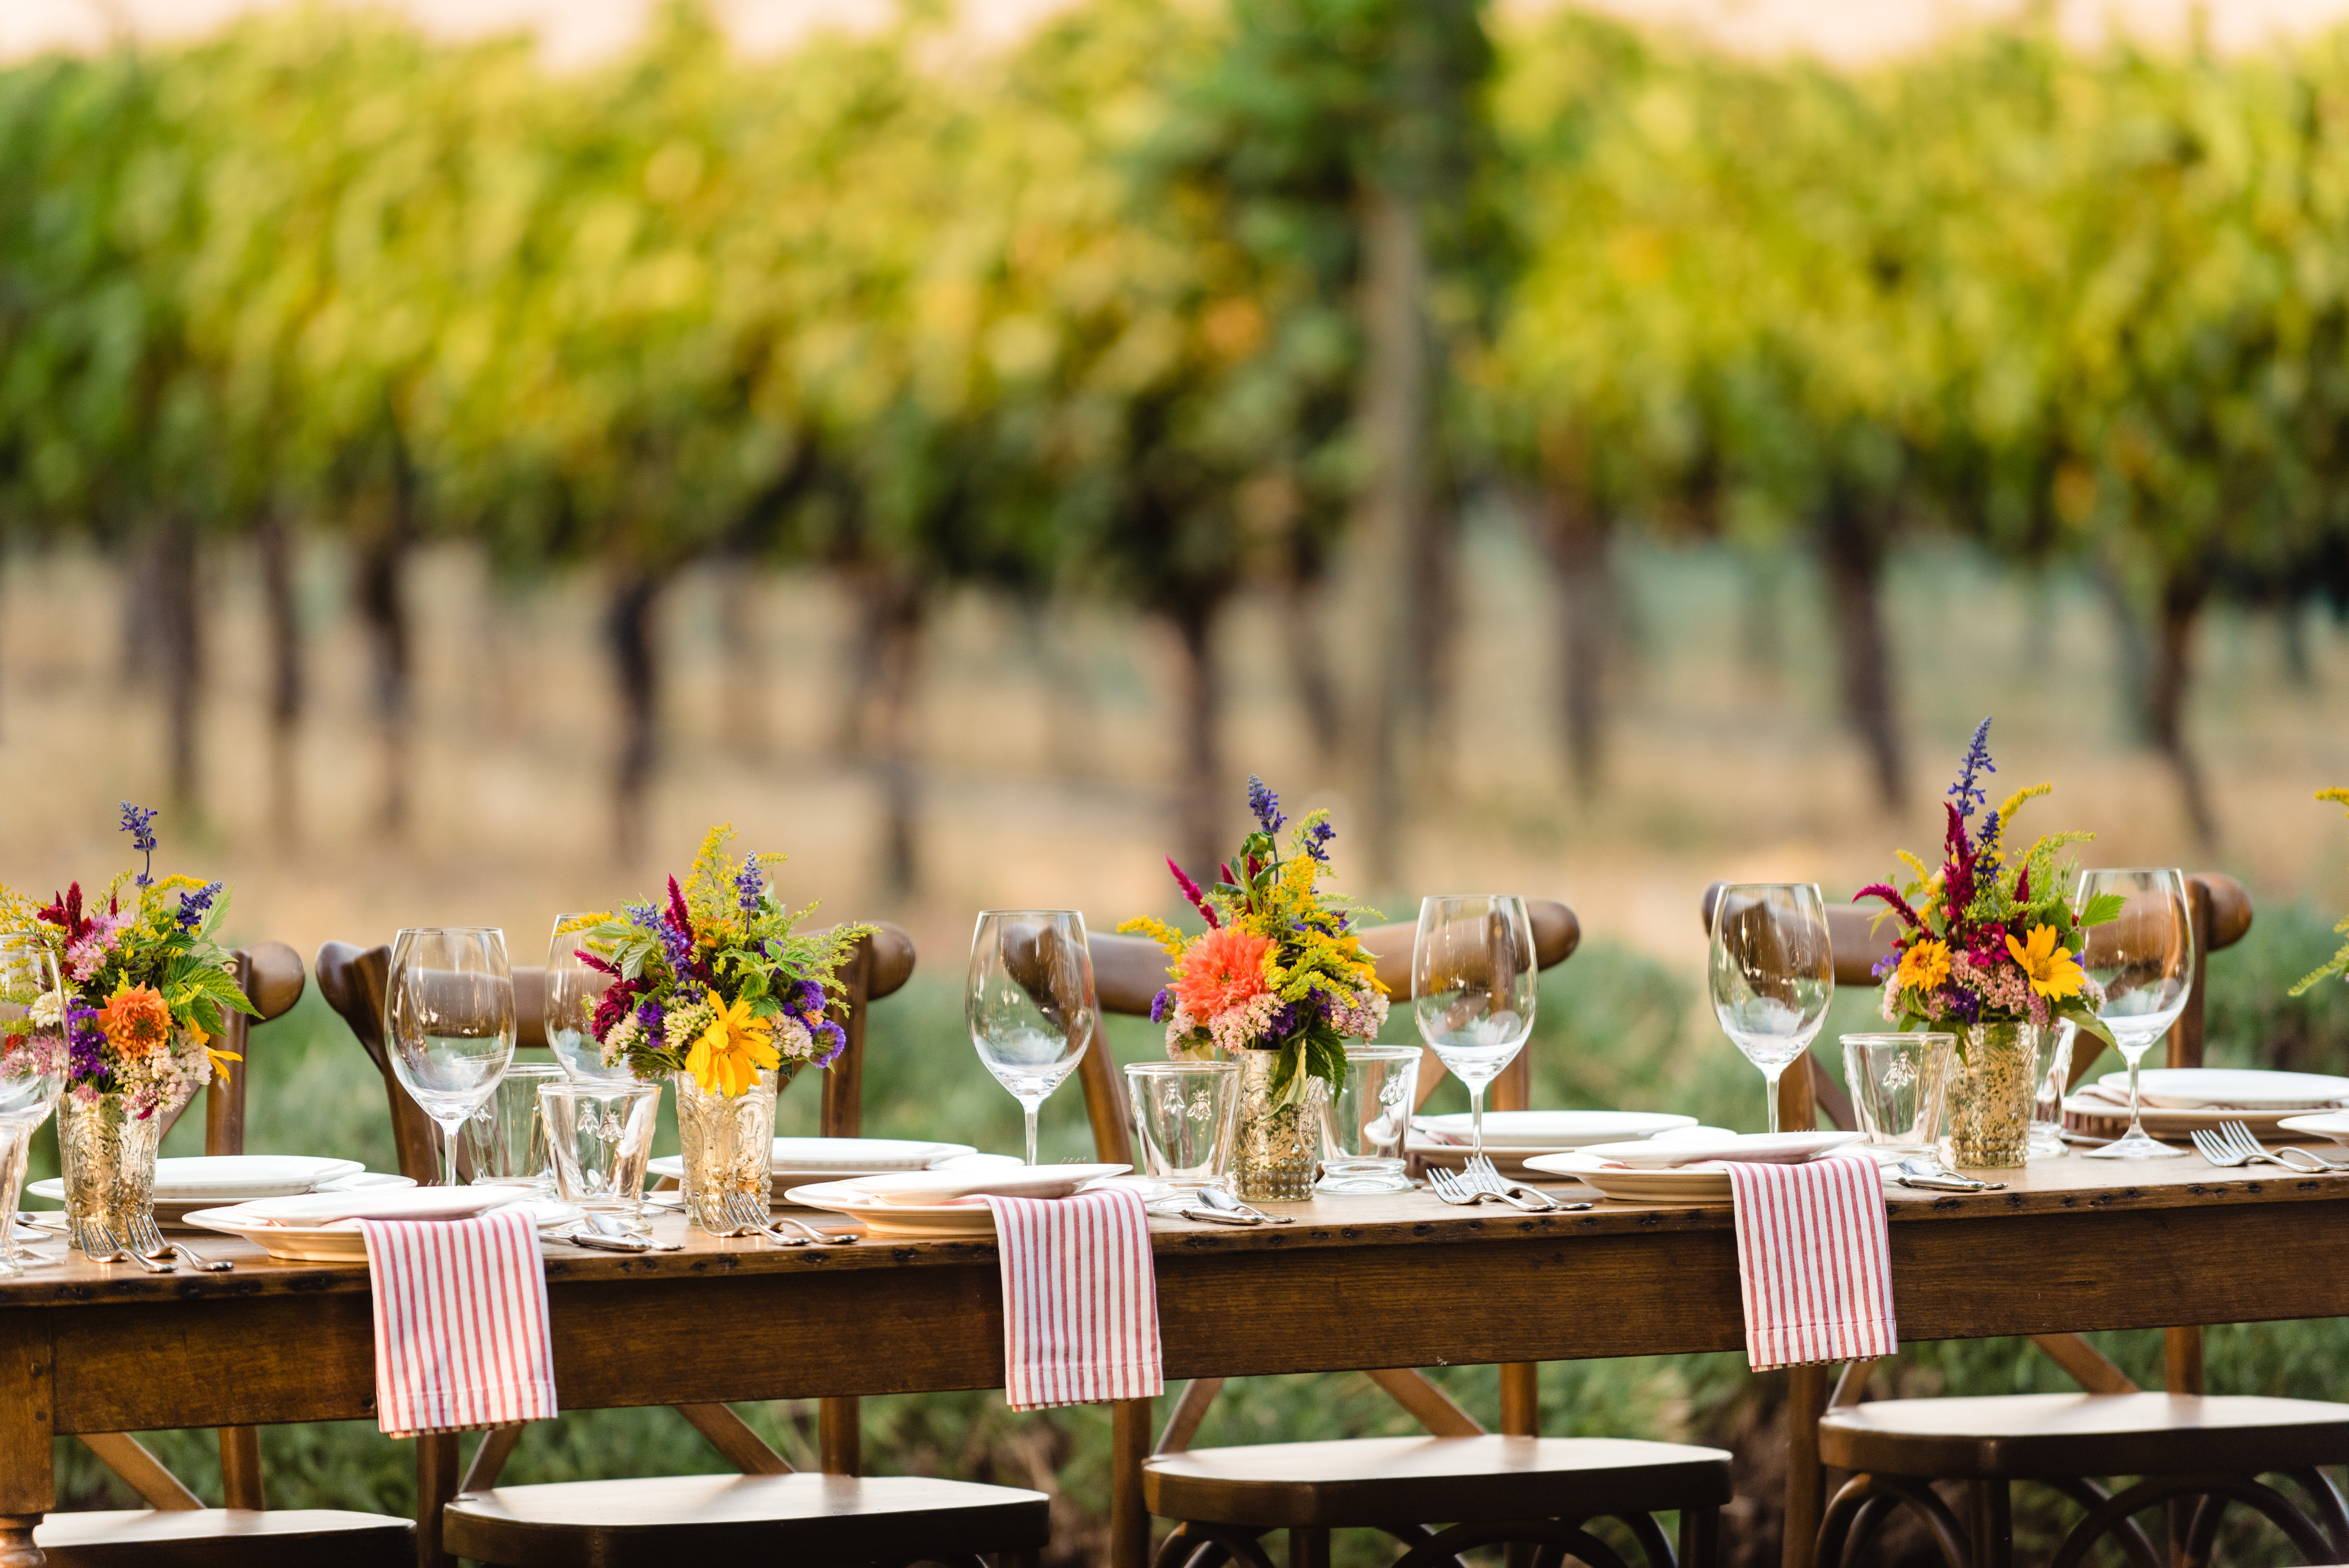 Table settings ready for guests at Abeja Winery and Inn